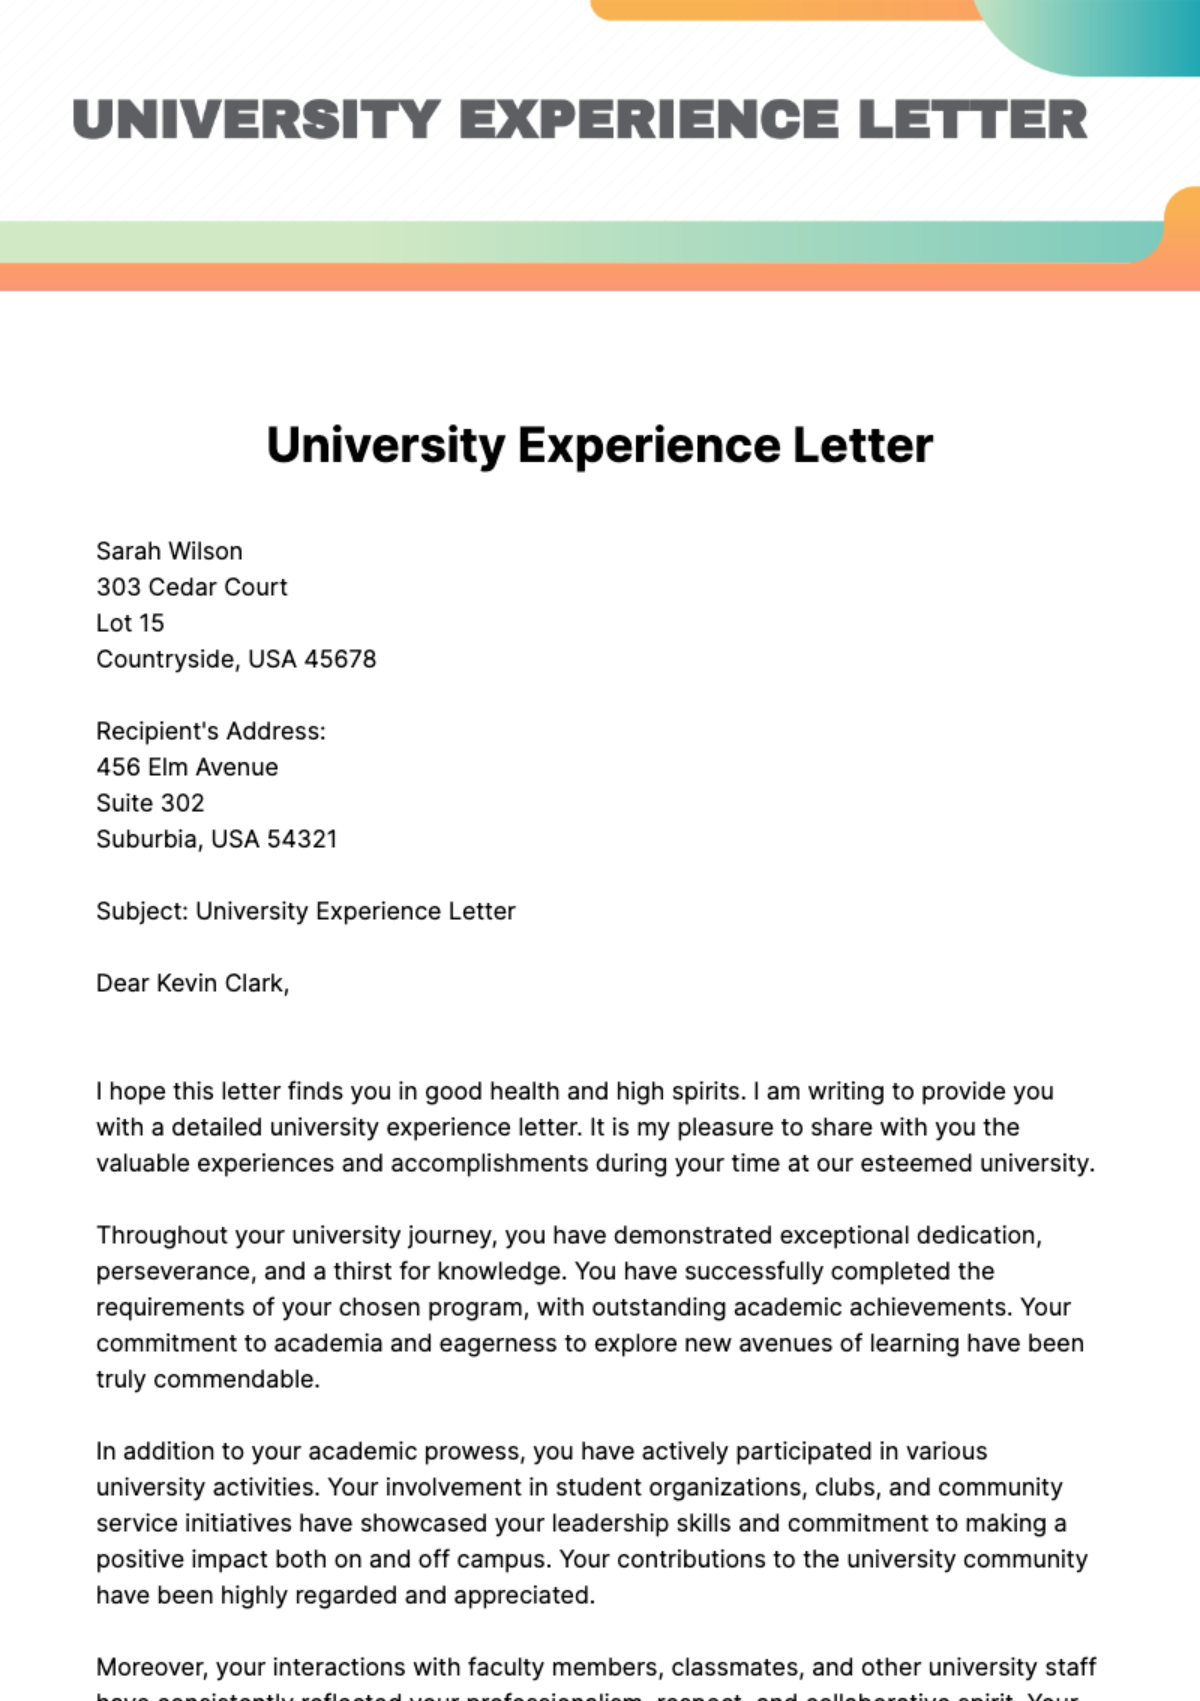 Free University Experience Letter Template